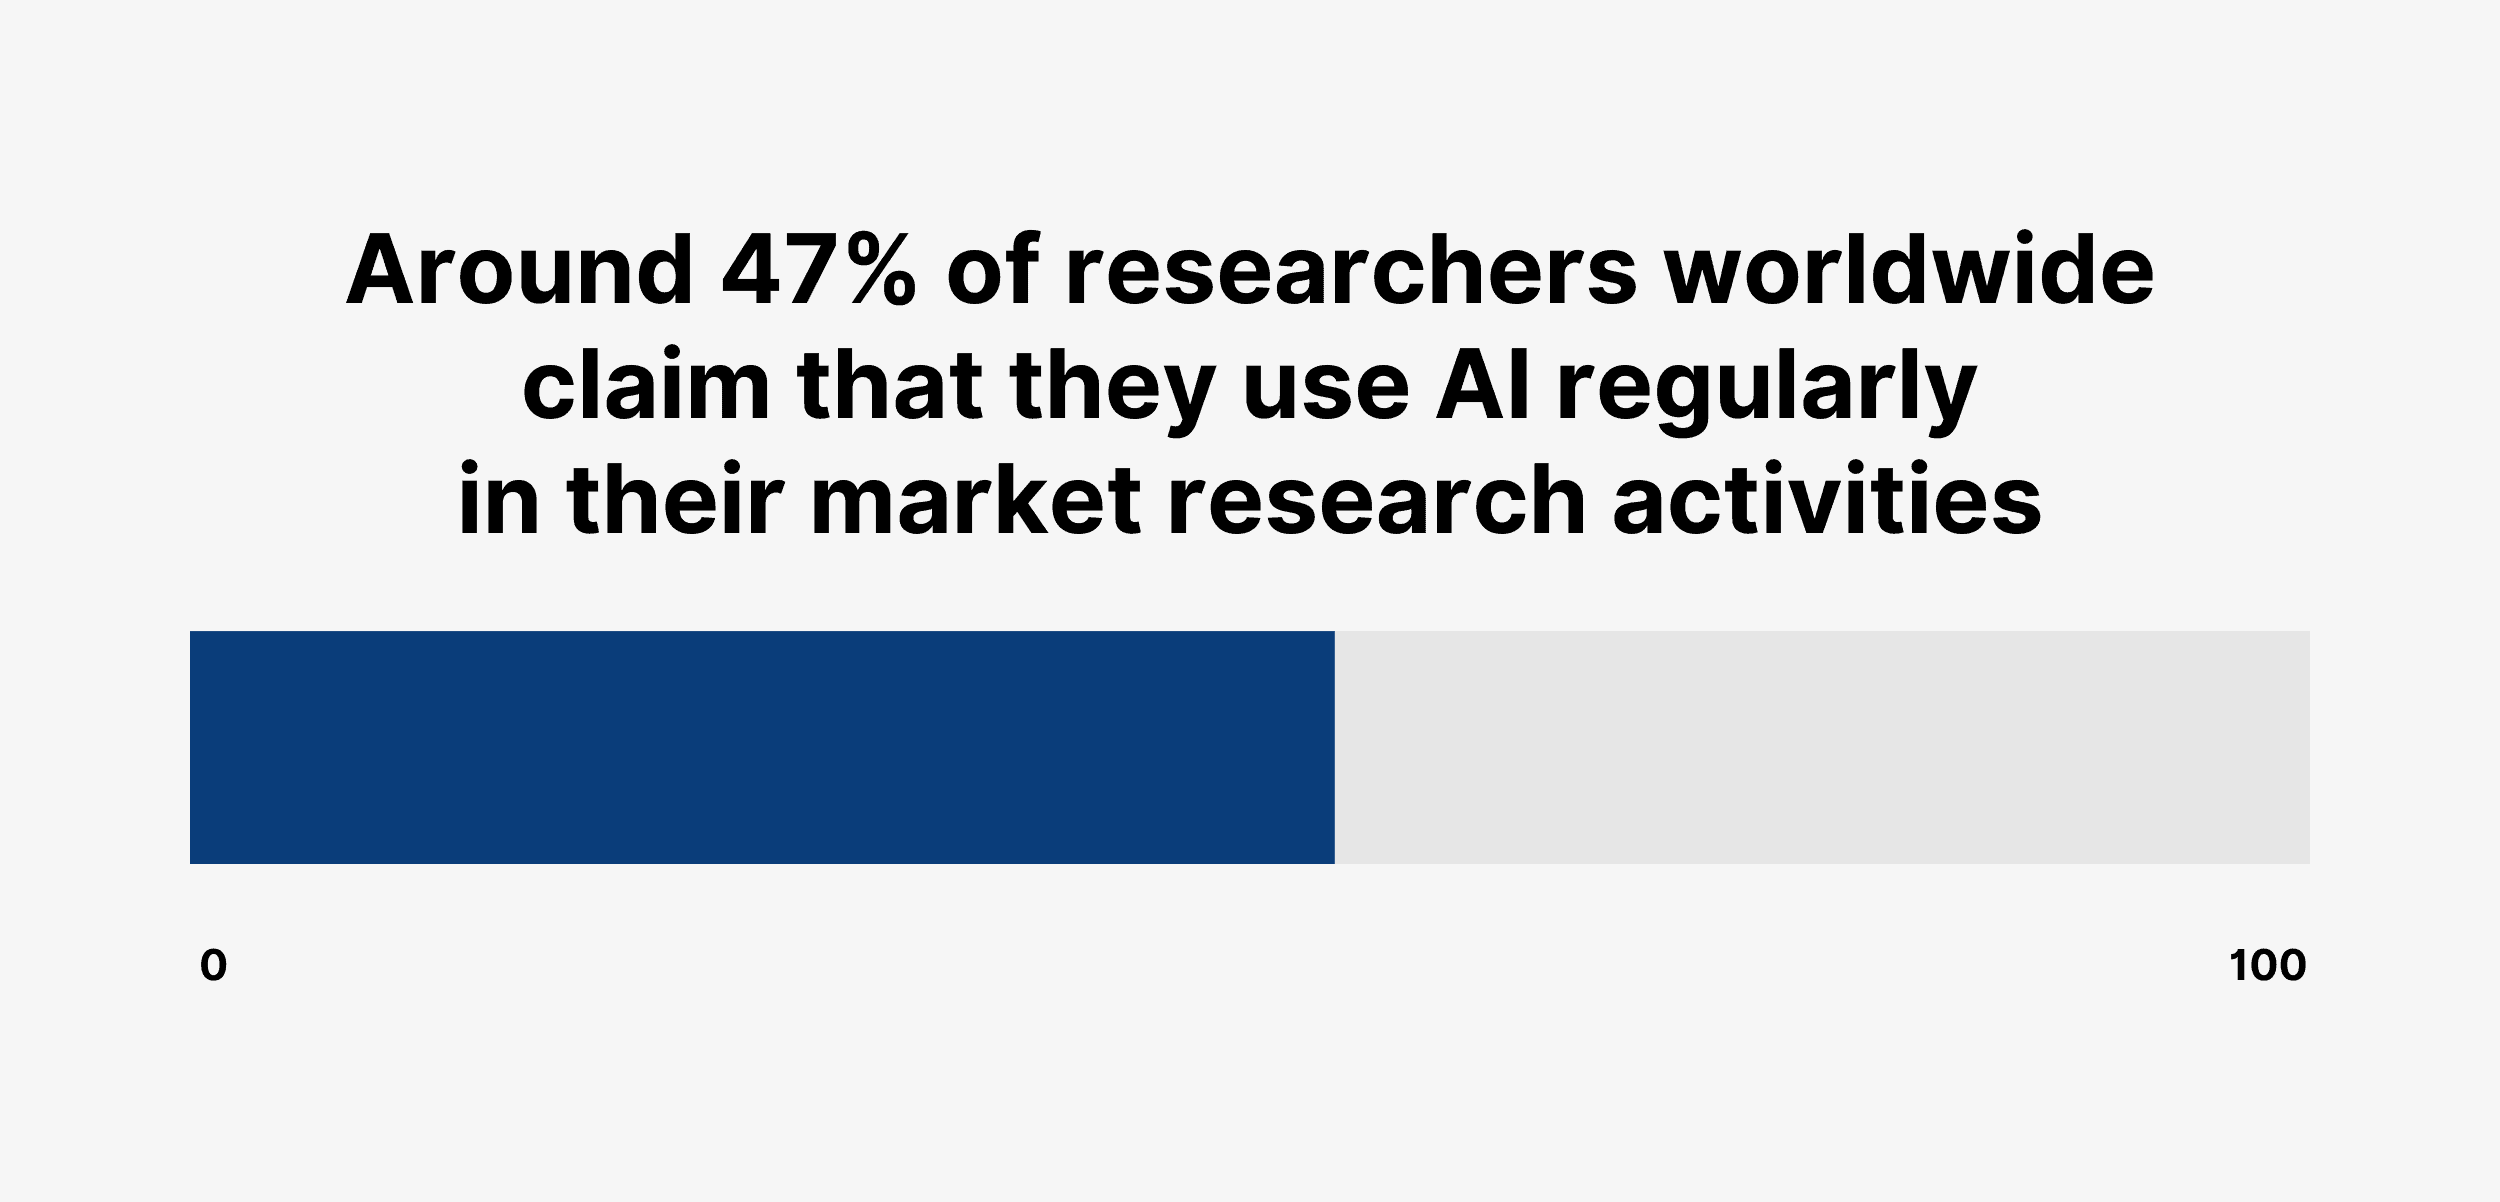 Around 47% of researchers worldwide claim that they use AI regularly in their market research activities